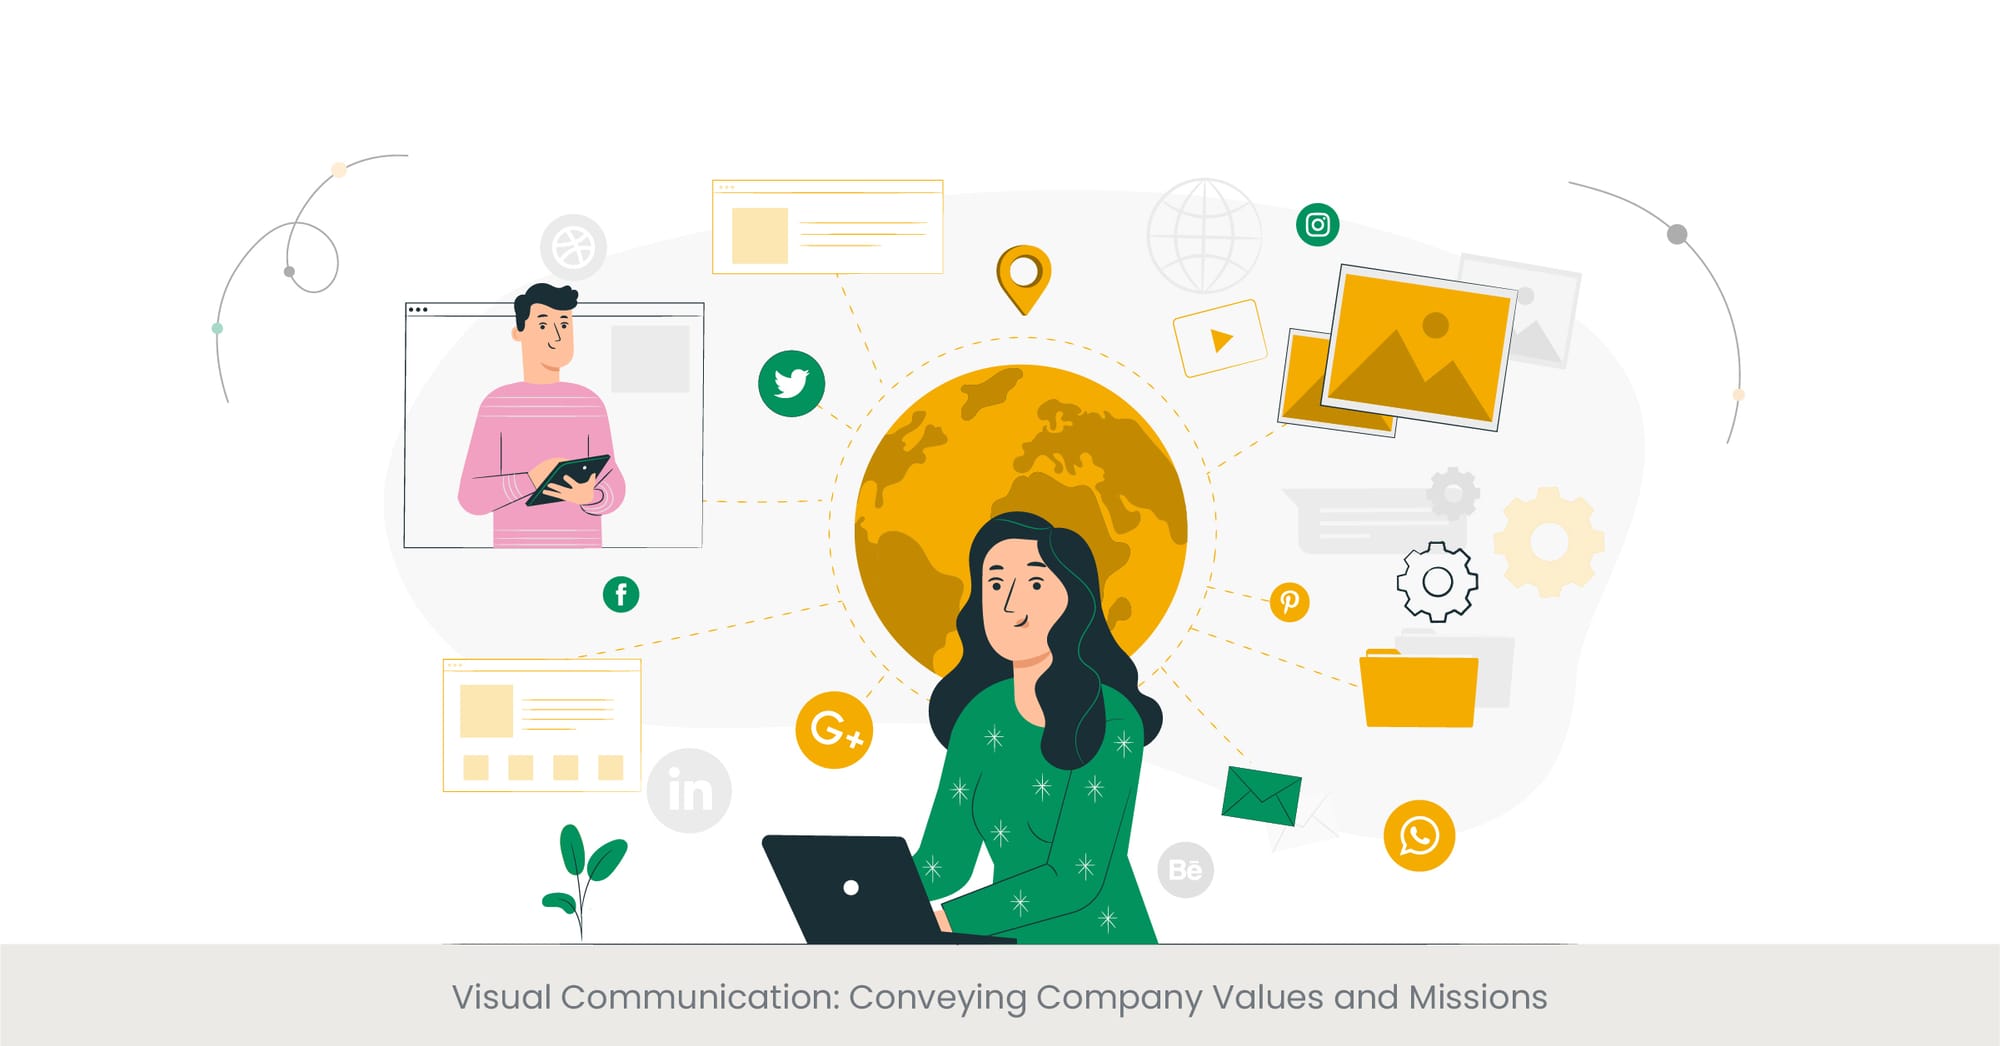 Visual Communication: Conveying Company Values and Missions